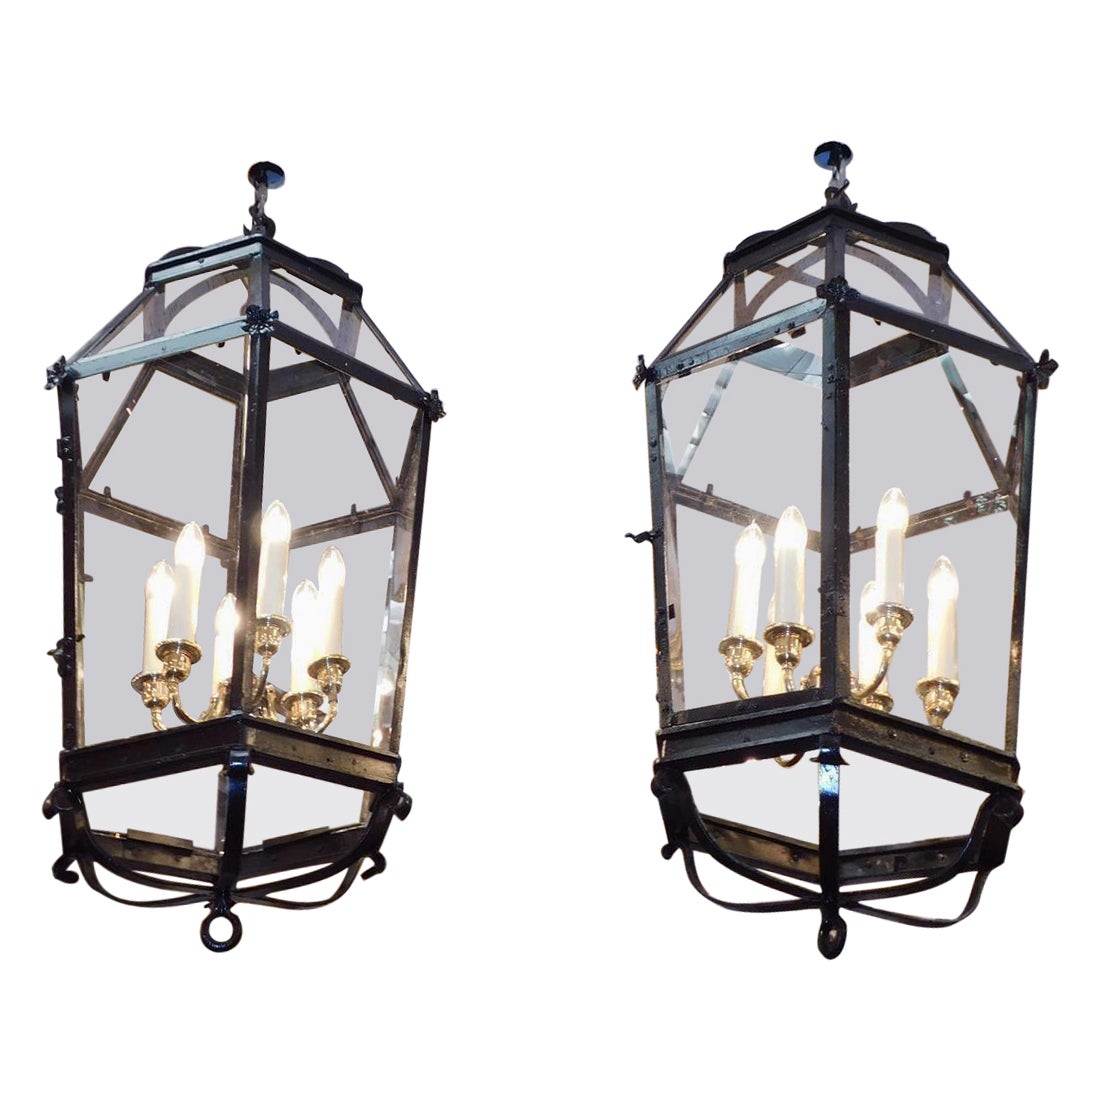 Pair of American Wrought Iron & Brass Dome Shaped Hanging Lanterns, Circa 1820 For Sale